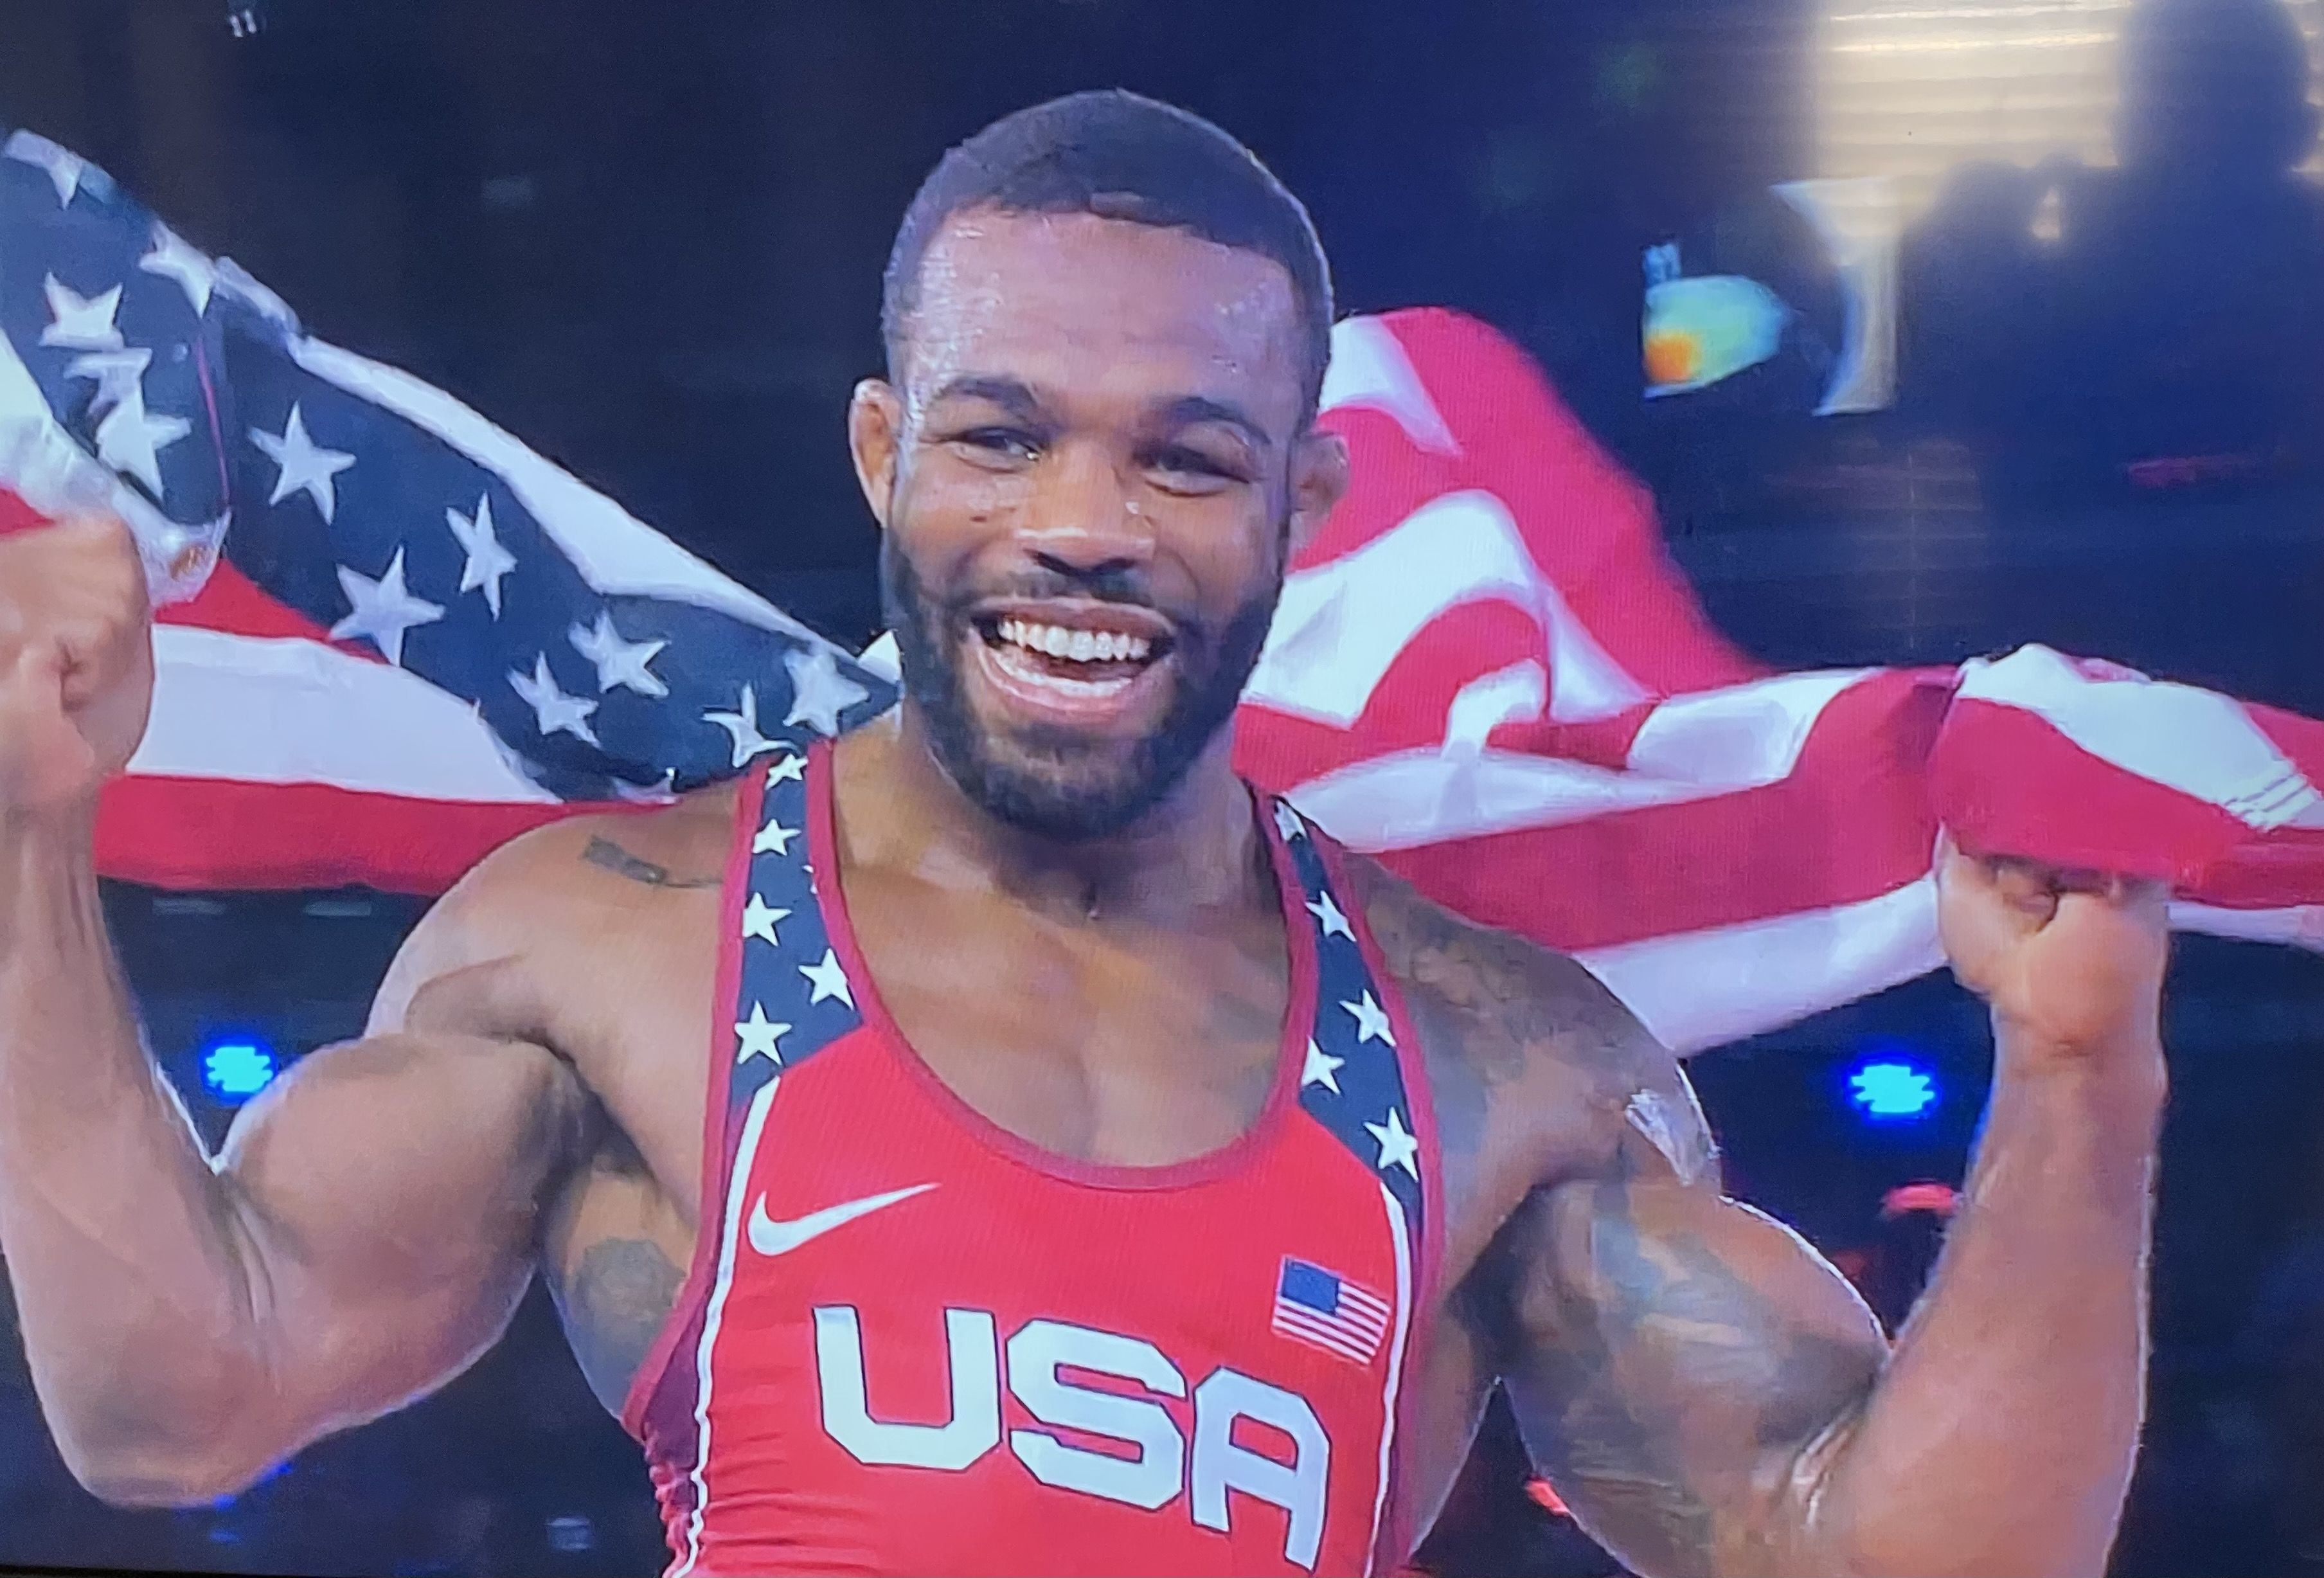 Jordan Burroughs ties record with sixth world Olympic wrestling title